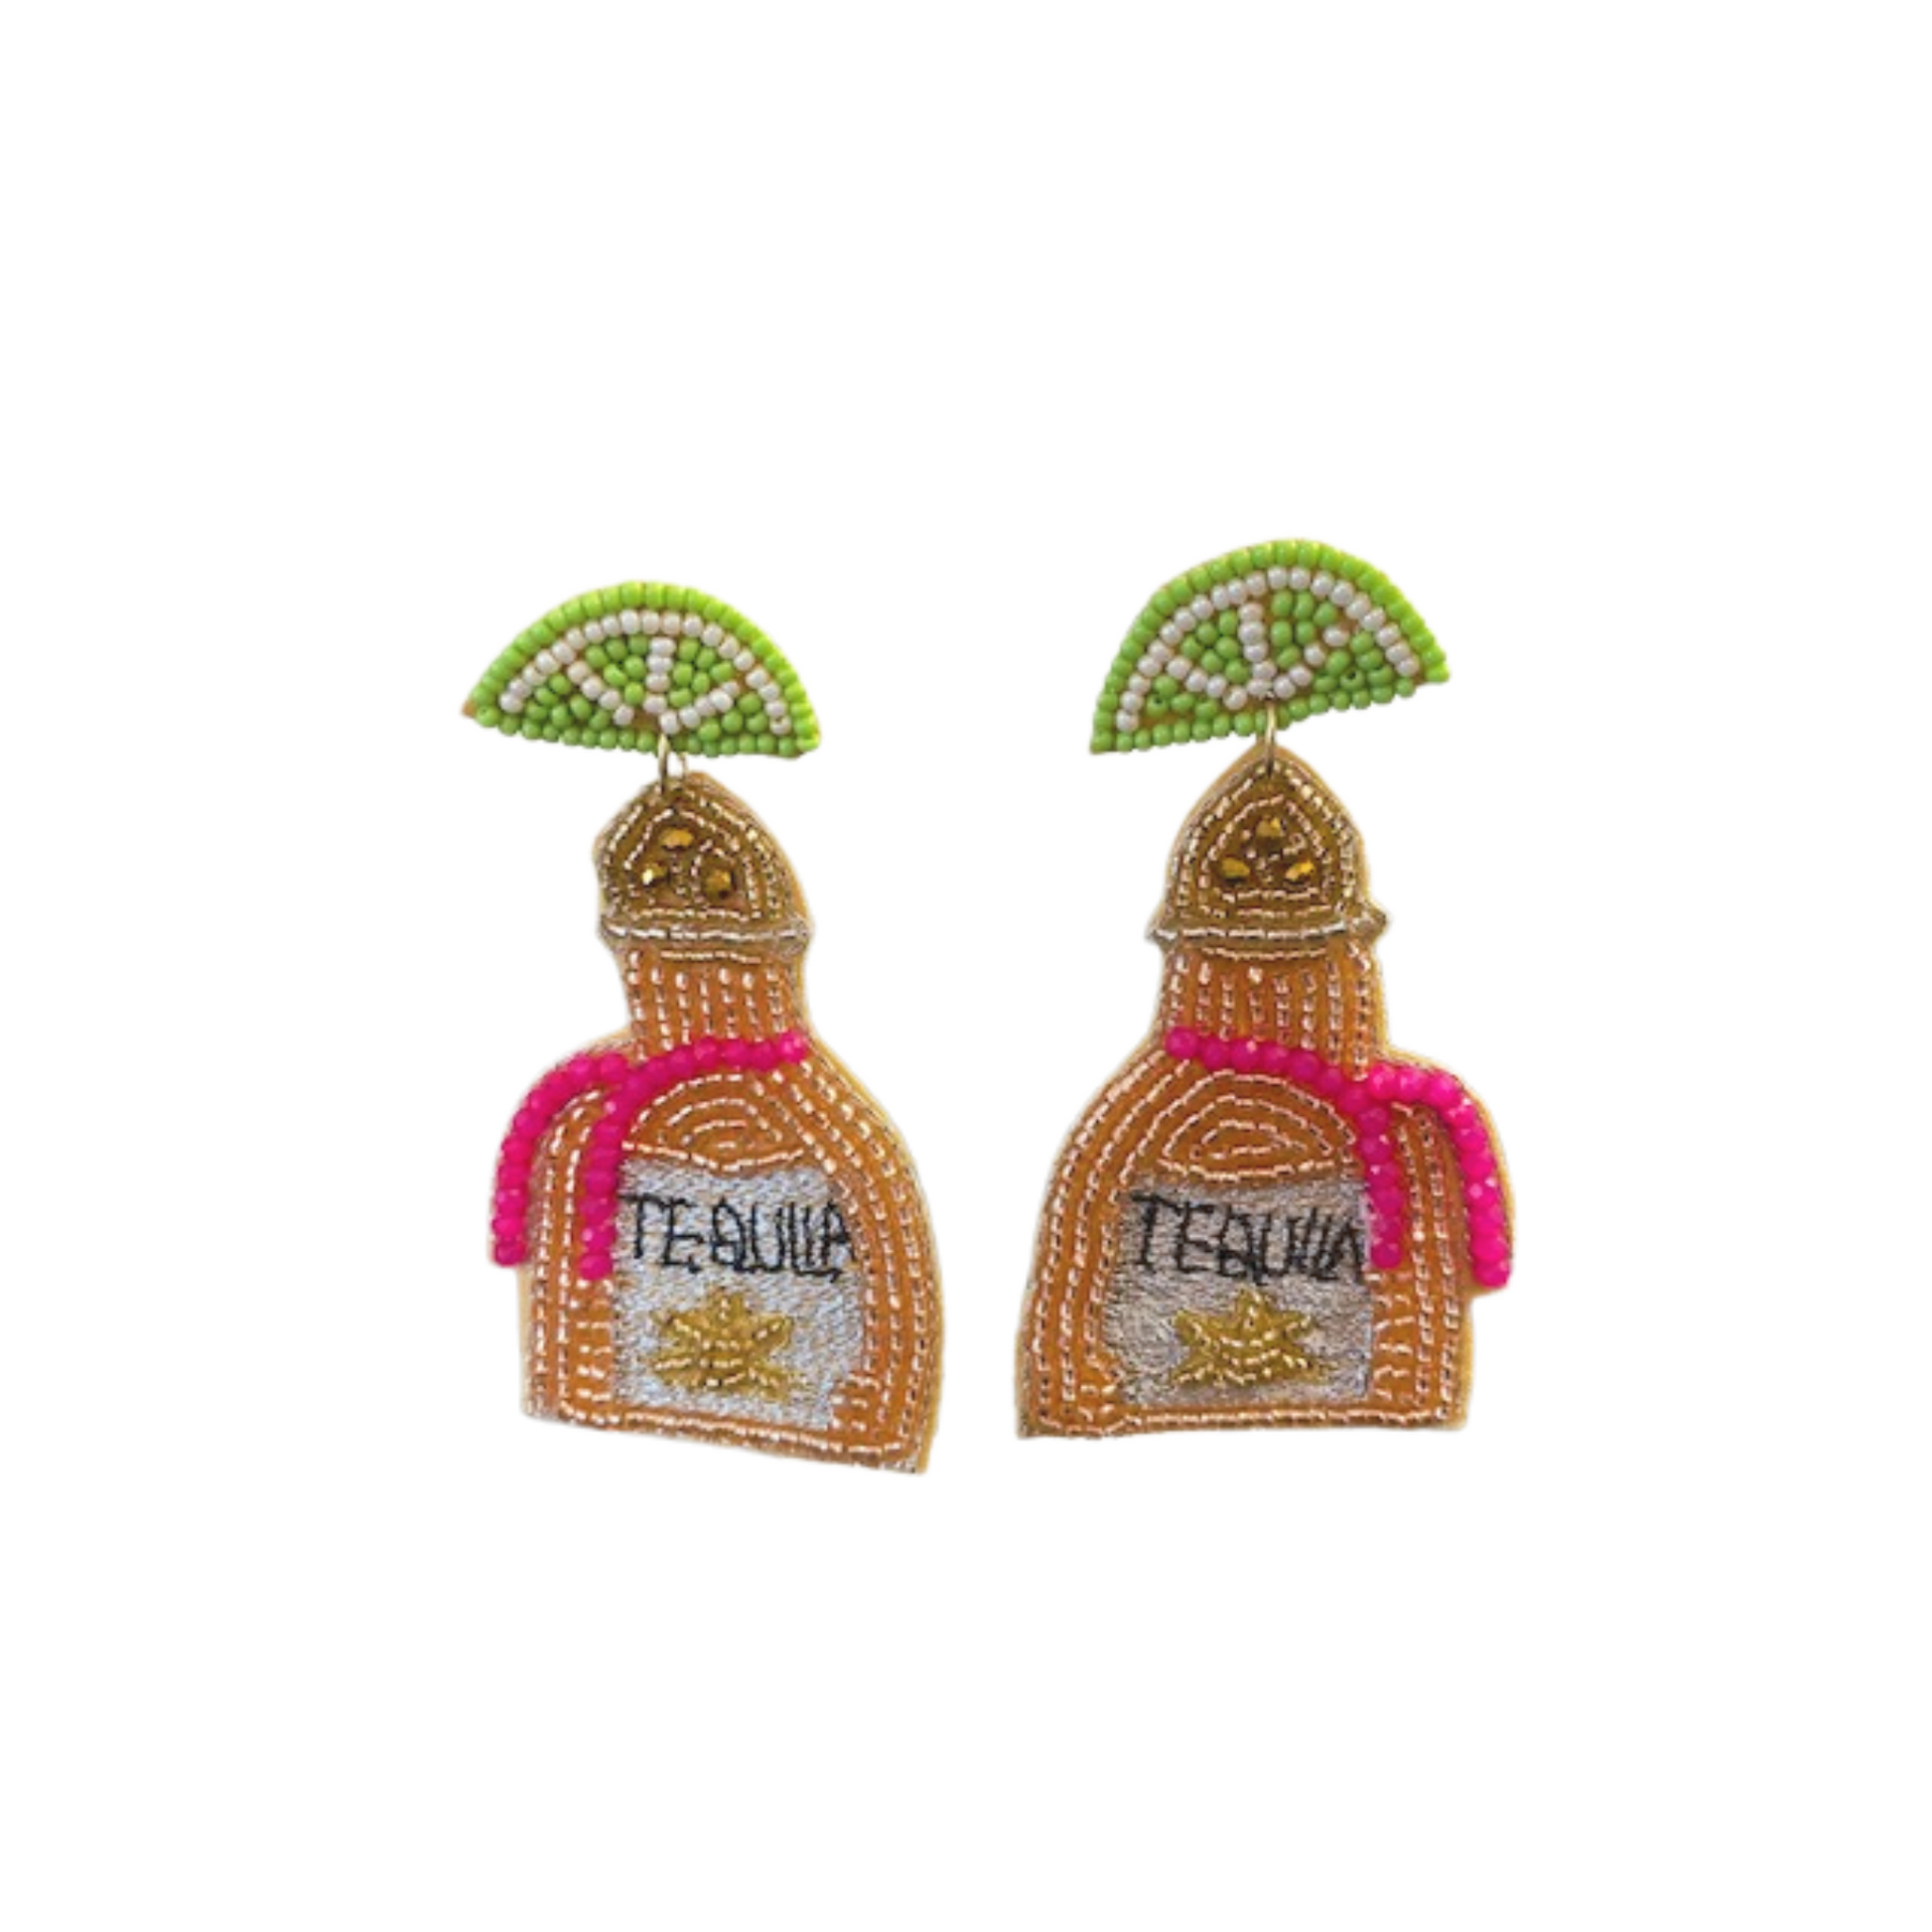 Accessories, Beaded Earrings, Earrings, Lime, Statement Pieces, Tequila, Tequila and Lime